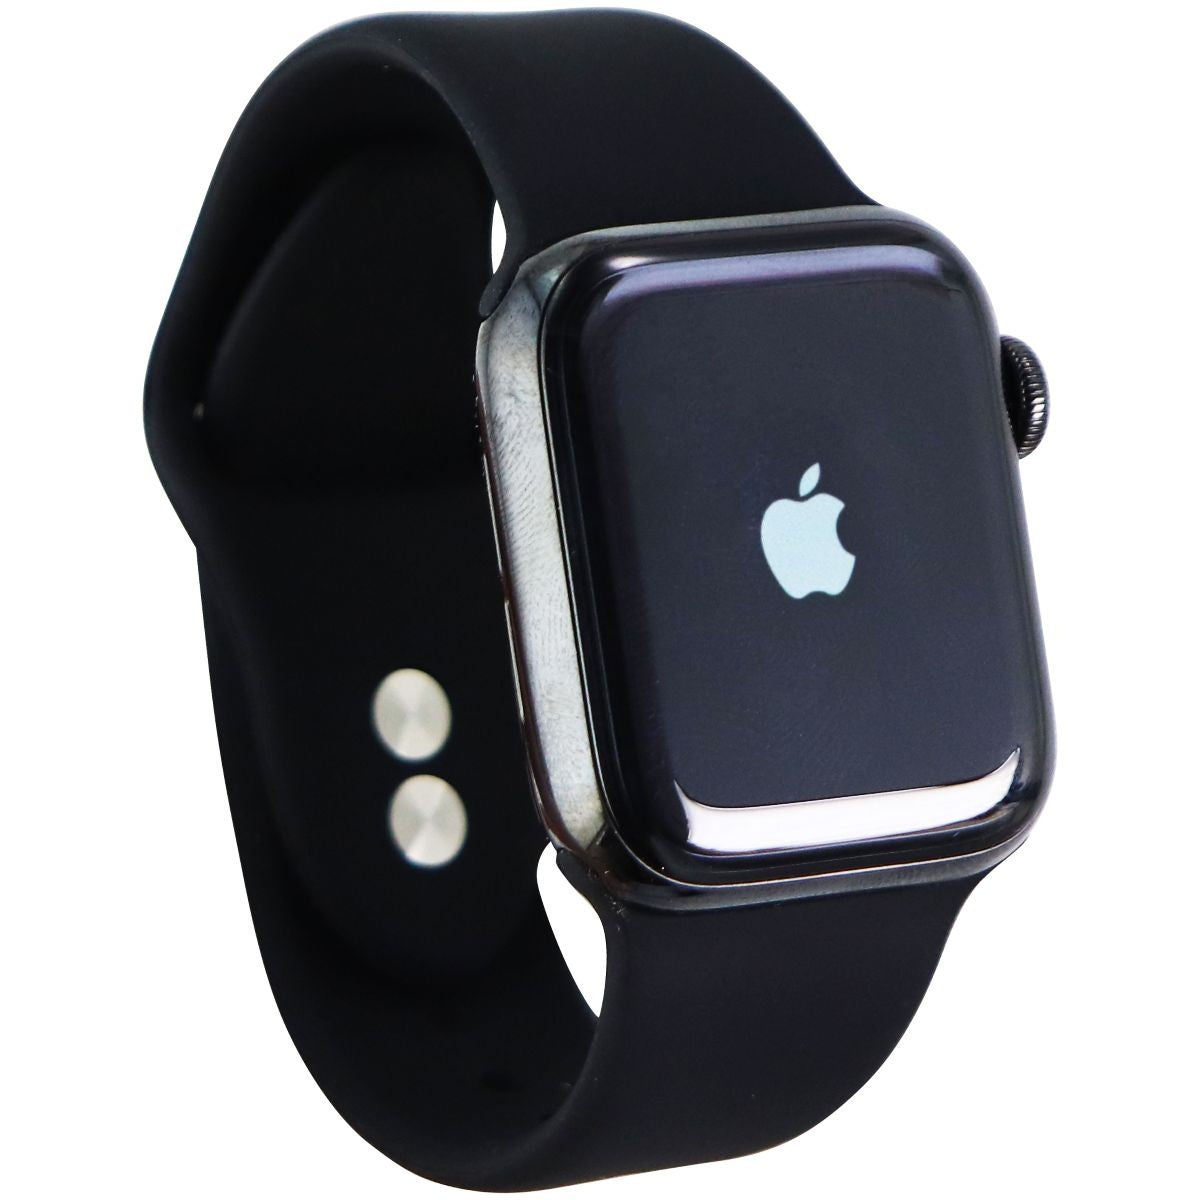 Apple Watch Hermes Series 6 (GPS+LTE) 40mm Space Blk Stainless 